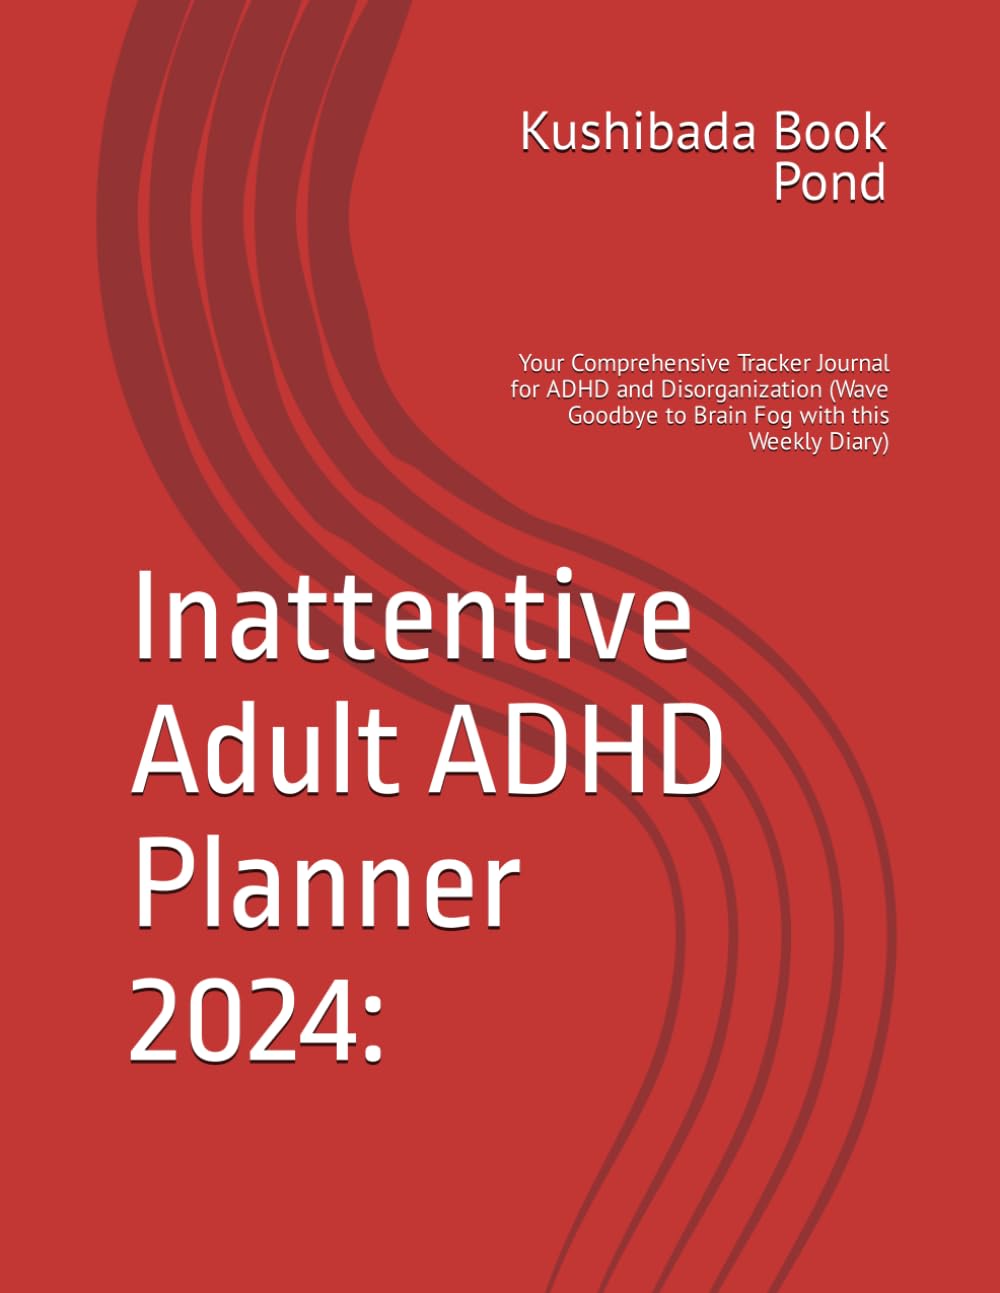 (Exclusive Digital Download) Inattentive Adult ADHD Planner 2024:: Your Comprehensive Tracker Journal for ADHD and Disorganization (Wave Goodbye to Brain Fog with this Weekly Diary) Amazon Top Seller! 